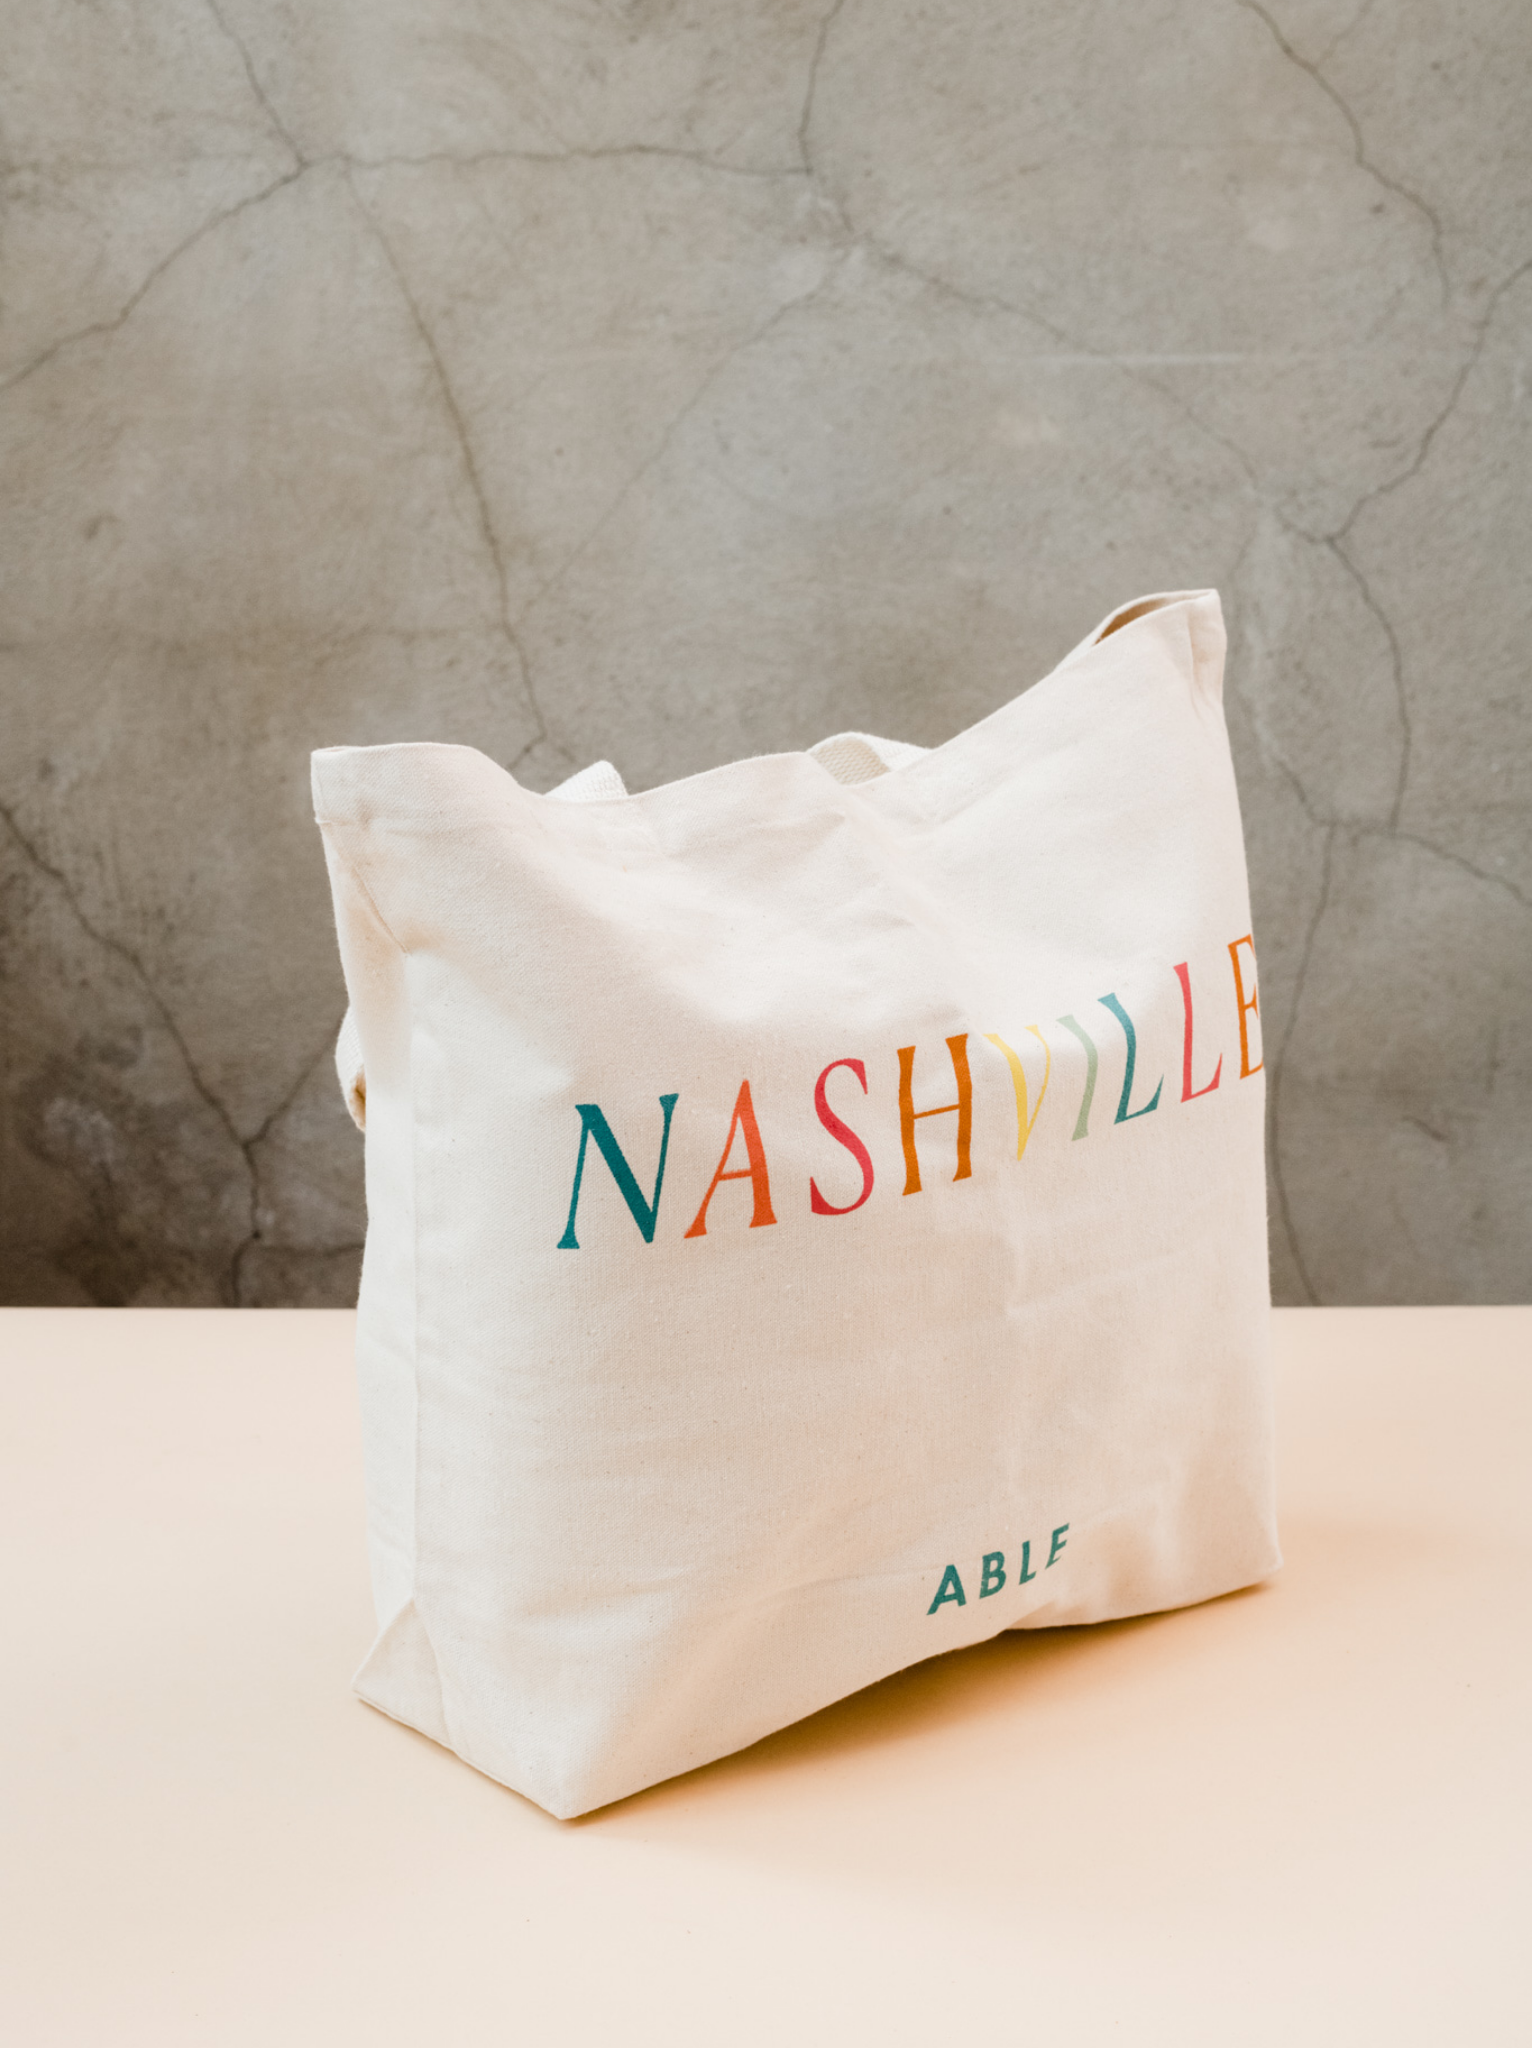 ABLE Nashville: Learn the Story Behind the Brand